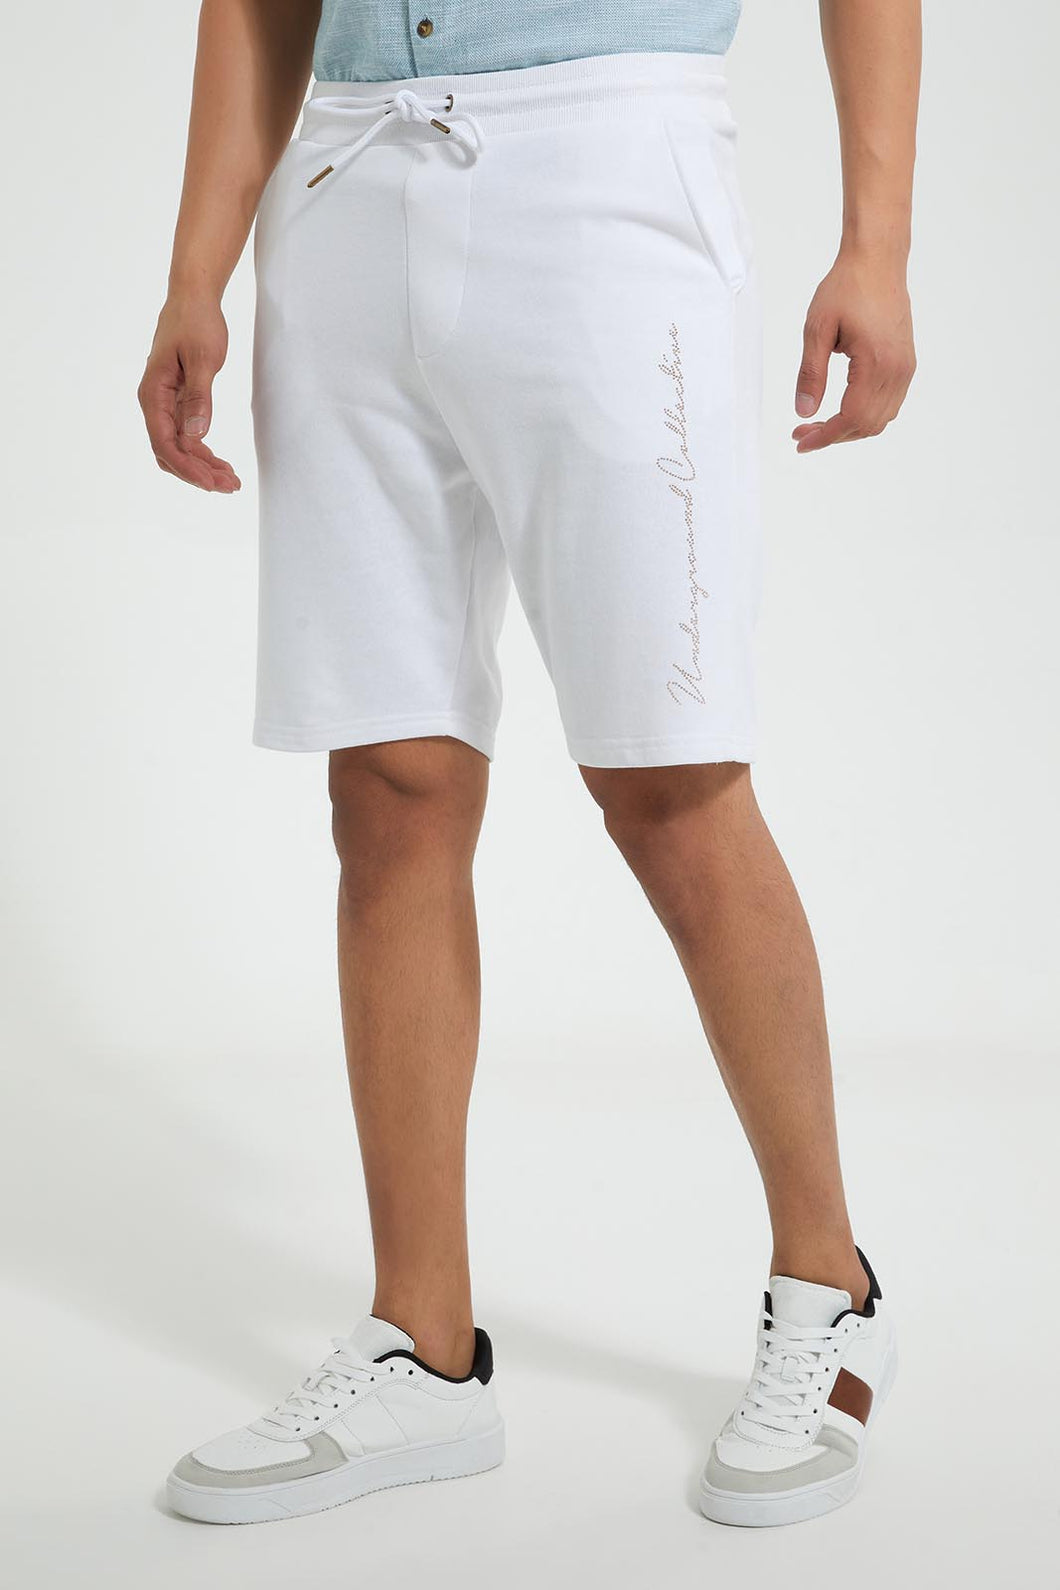 Redtag-White-Short-With-Studs-Active-Shorts-Men's-